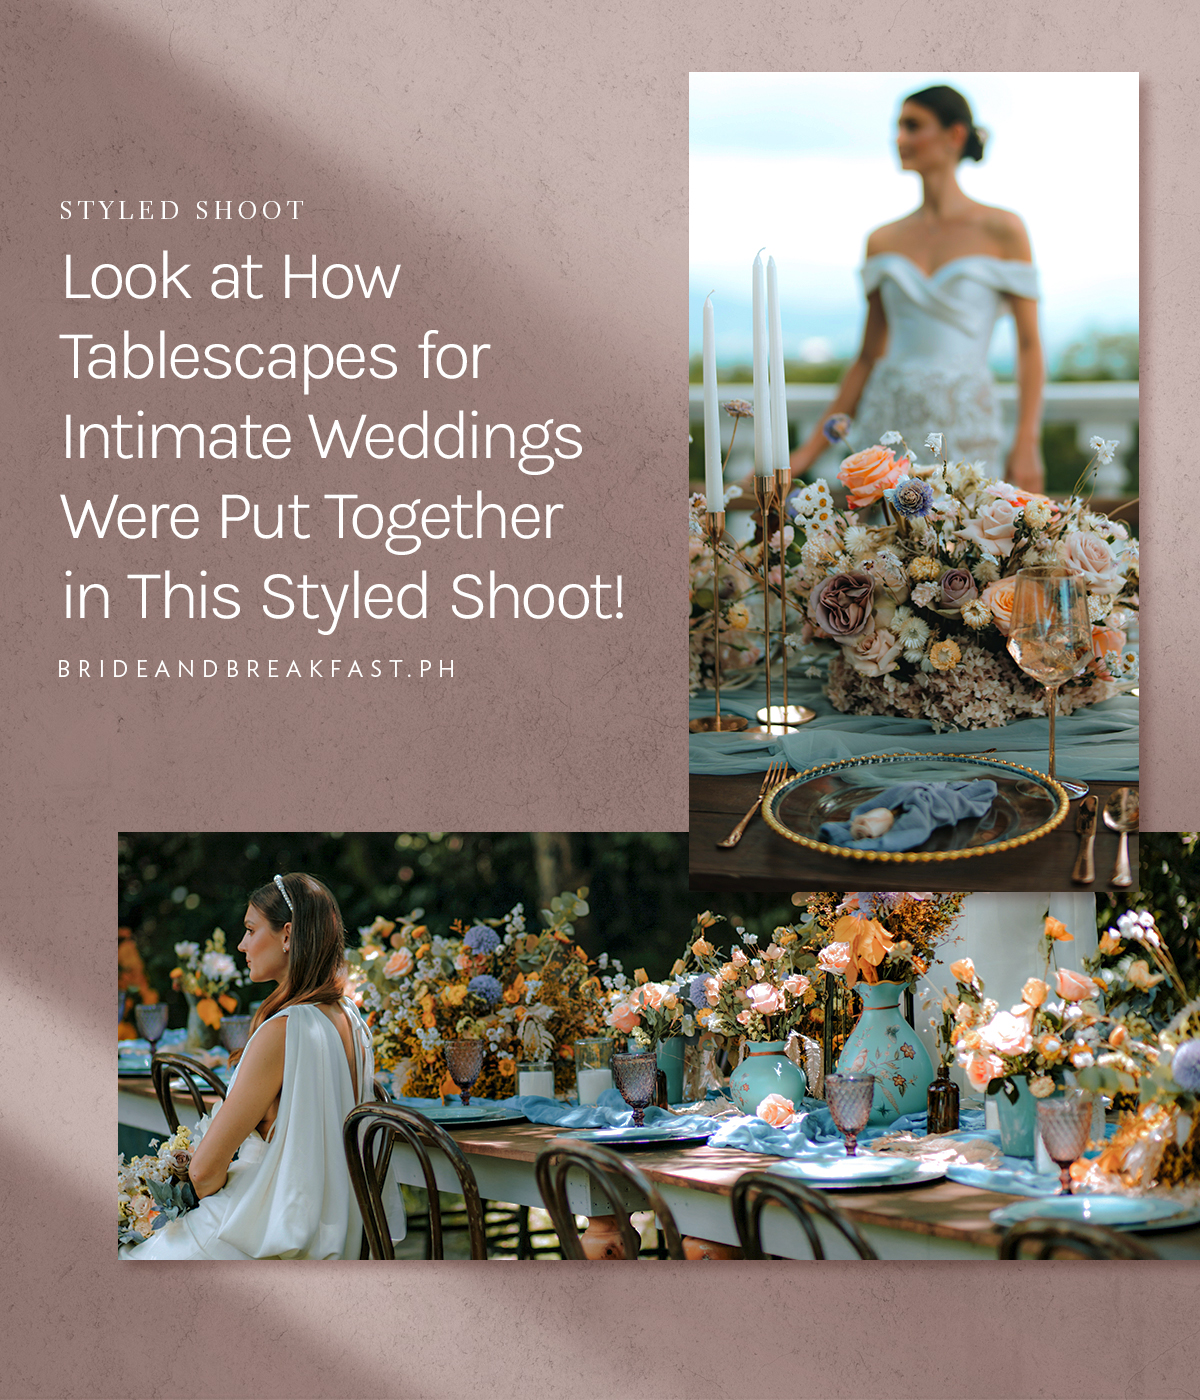 Look at How Tablescapes for Intimate Weddings Were Put Together in This Styled Shoot!